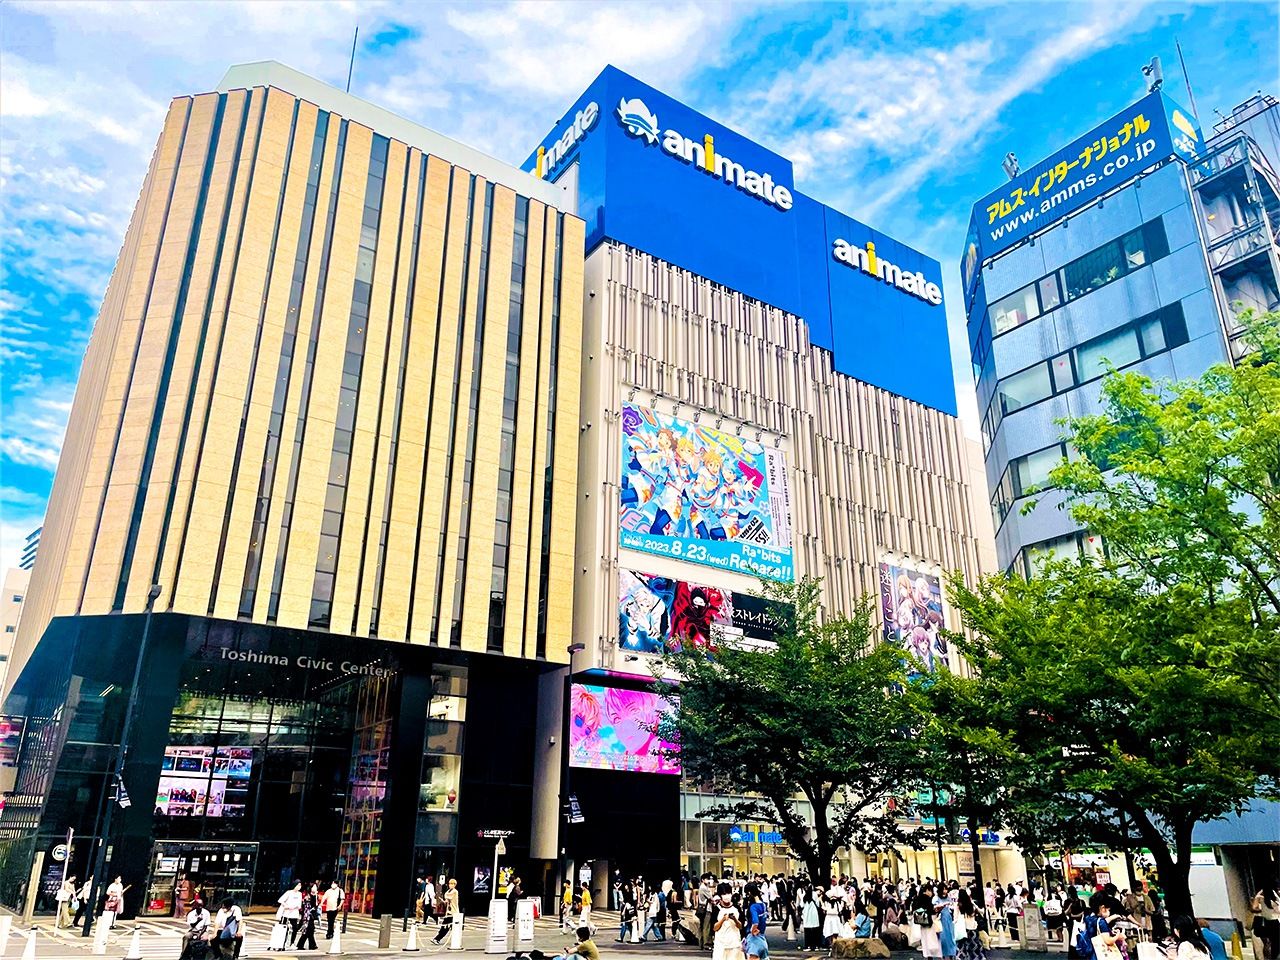 Recently renovated Animate Ikebukuro. Many customers cannot wait until they get home, choosing instead to open their purchases in Nakaikebukuro Park, seen here in the foreground. (© Hanioka Yuri)